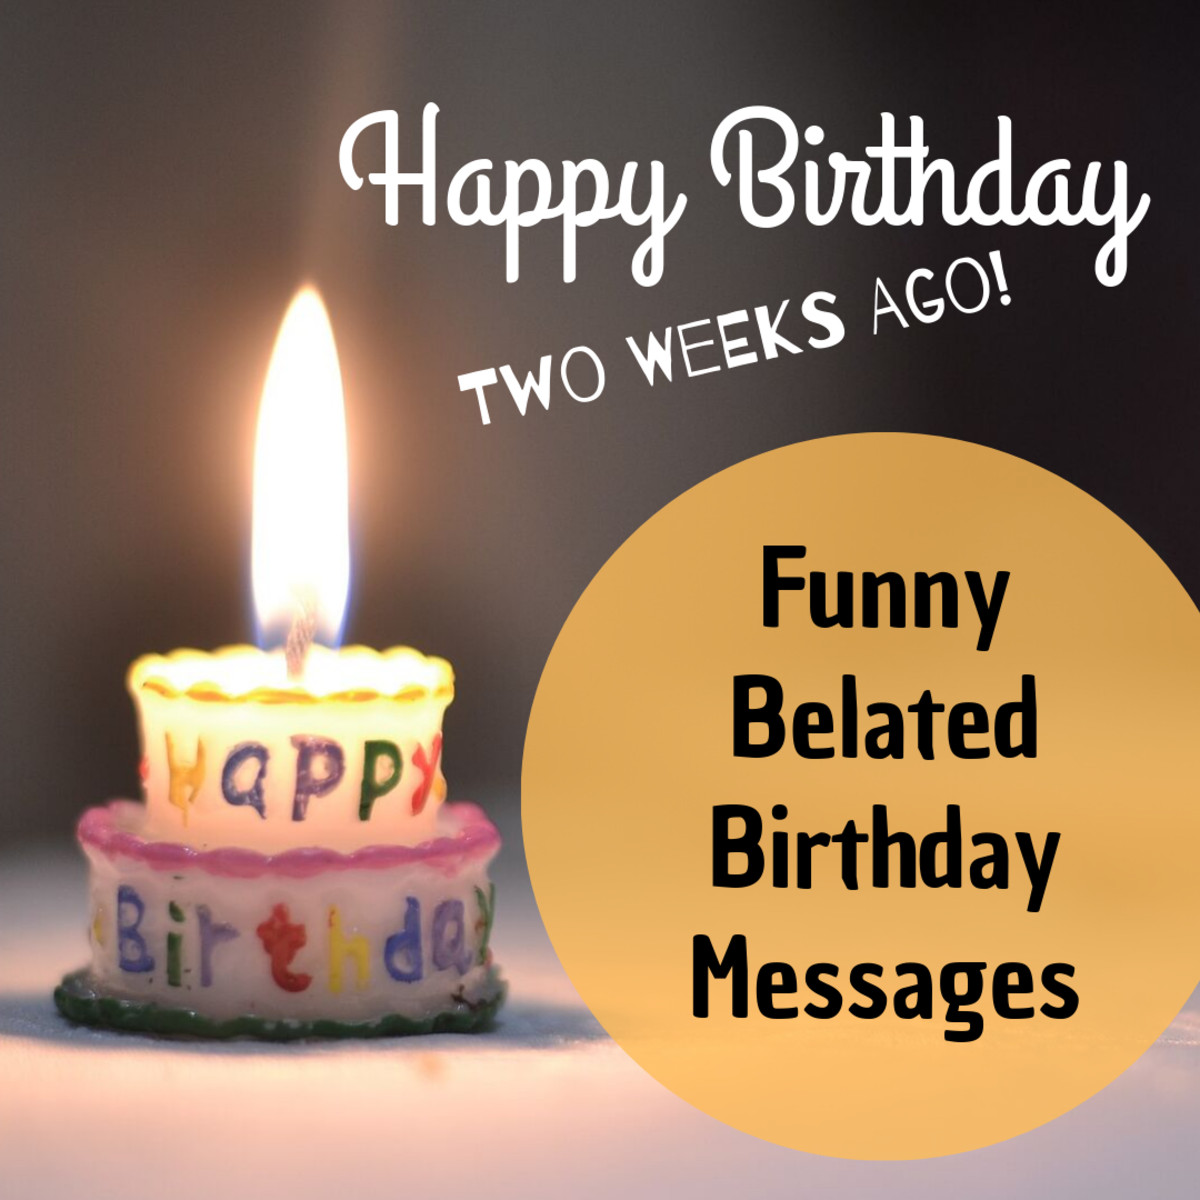 Belated Birthday Wishes Funny
 Funny Belated Happy Birthday Wishes Late Messages and